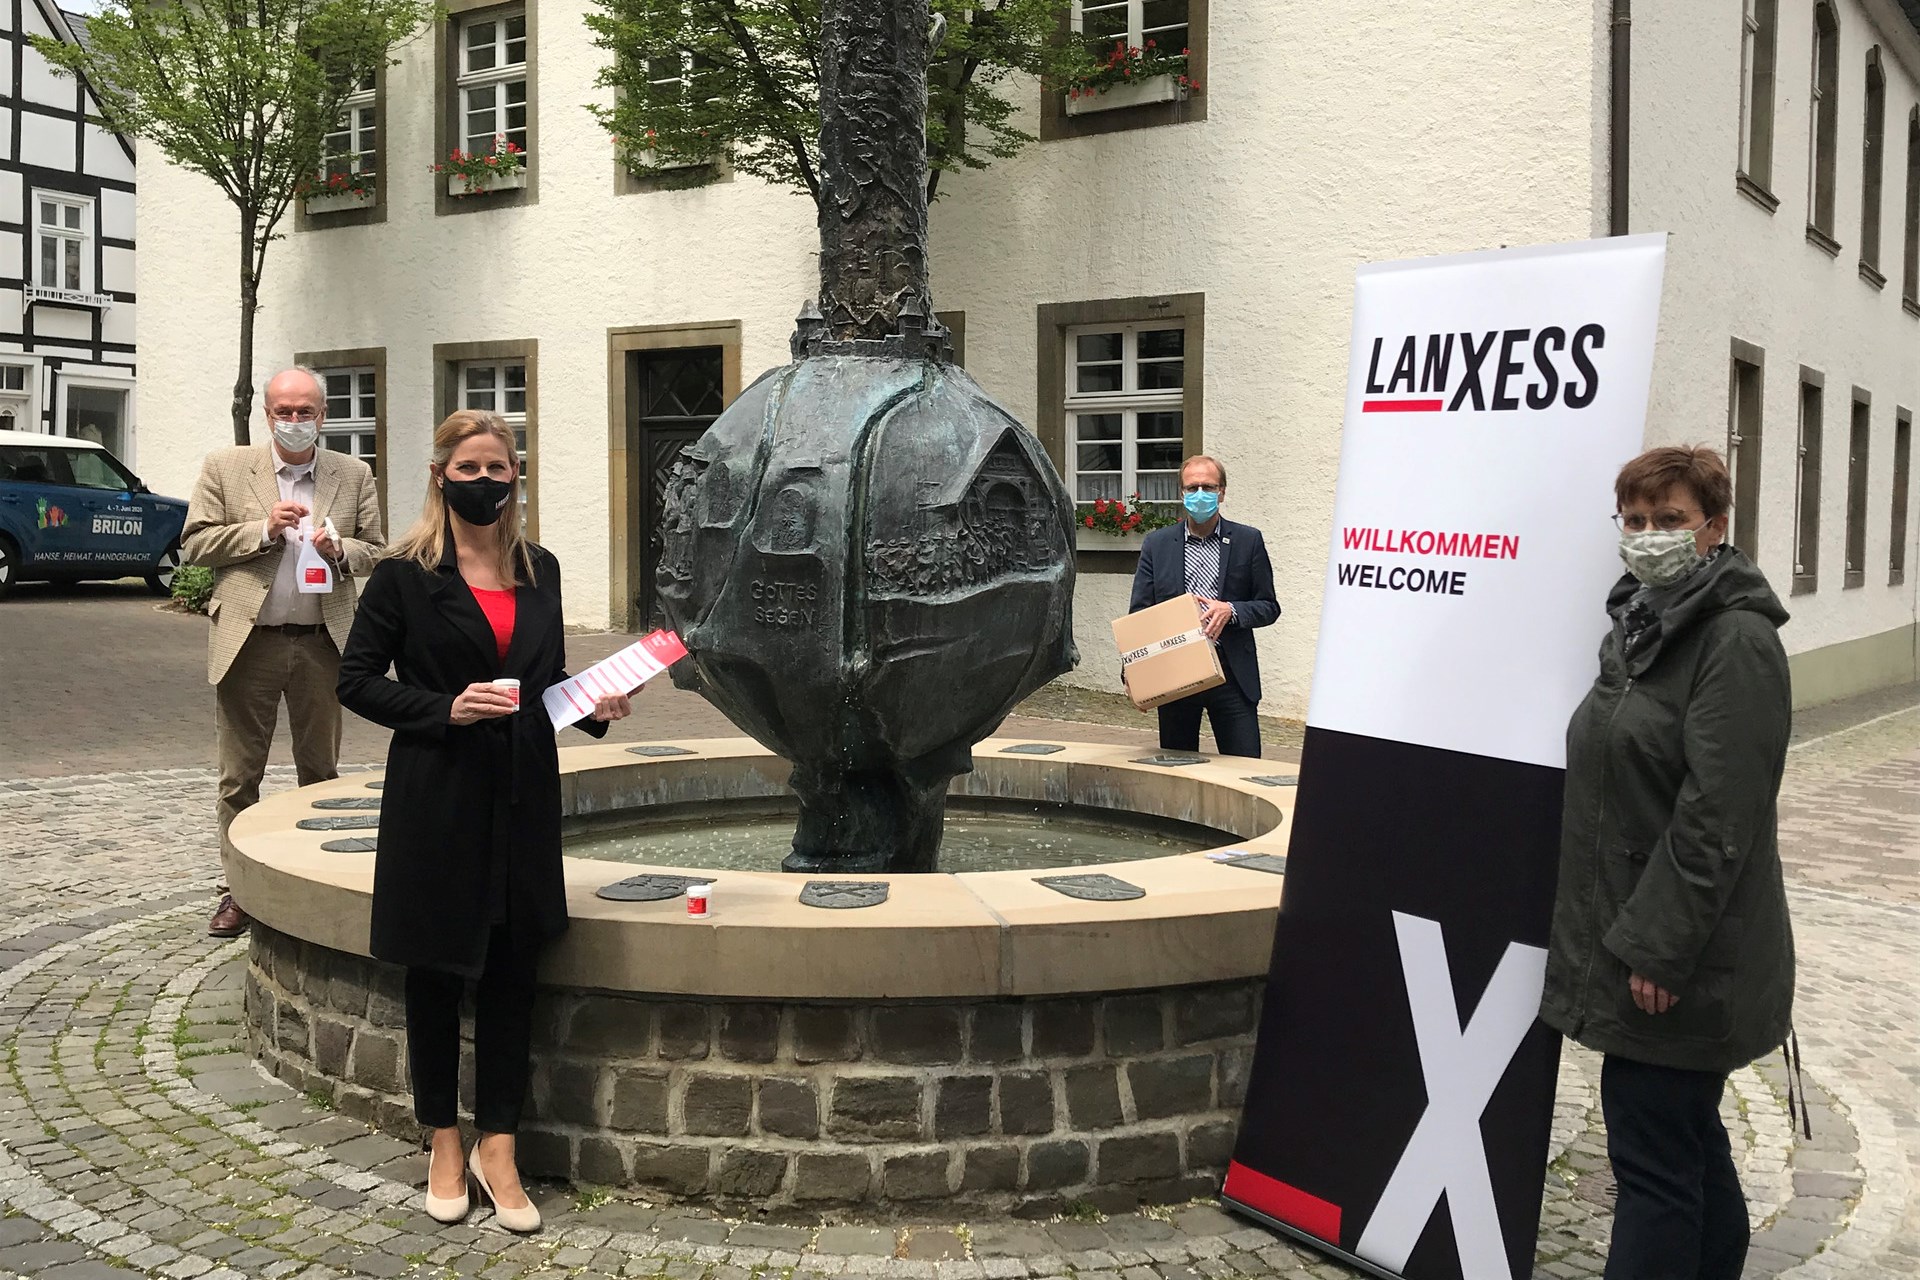 Nina Hasenkamp (2nd from left in the picture), head of the LANXESS education initiative, representing all the schools in Brilon, hands over a package containing the disinfectant Rely+On Virkon to the Mayor of Brilon, Dr. Christof Bartsch, and the headmaster of Petrinum Gymnasium,
Johannes Droste. Also present was Christina Hoppe, Head of the Schools and Sports Department.